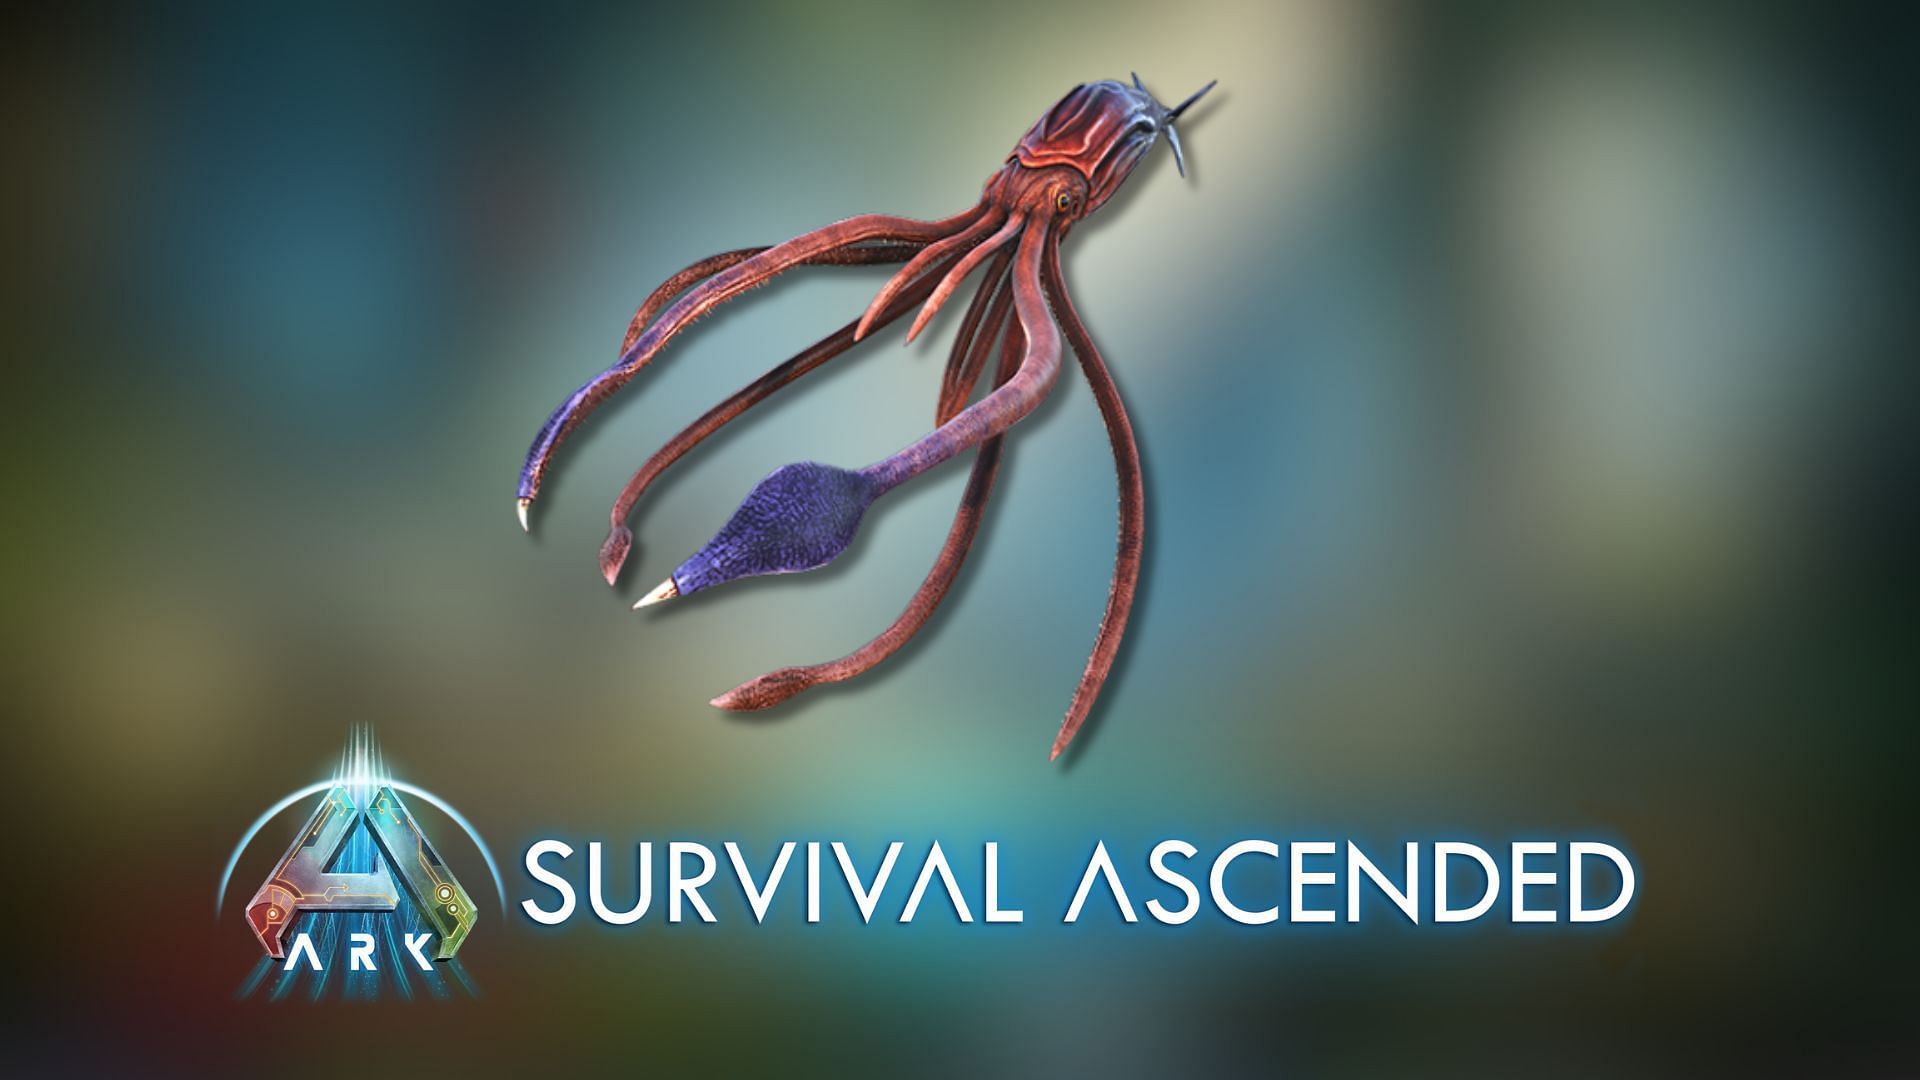 Players can easily farm Black Pearls in Ark Survival Ascended using Tusoteuthis (Image via Studio Wildcard)